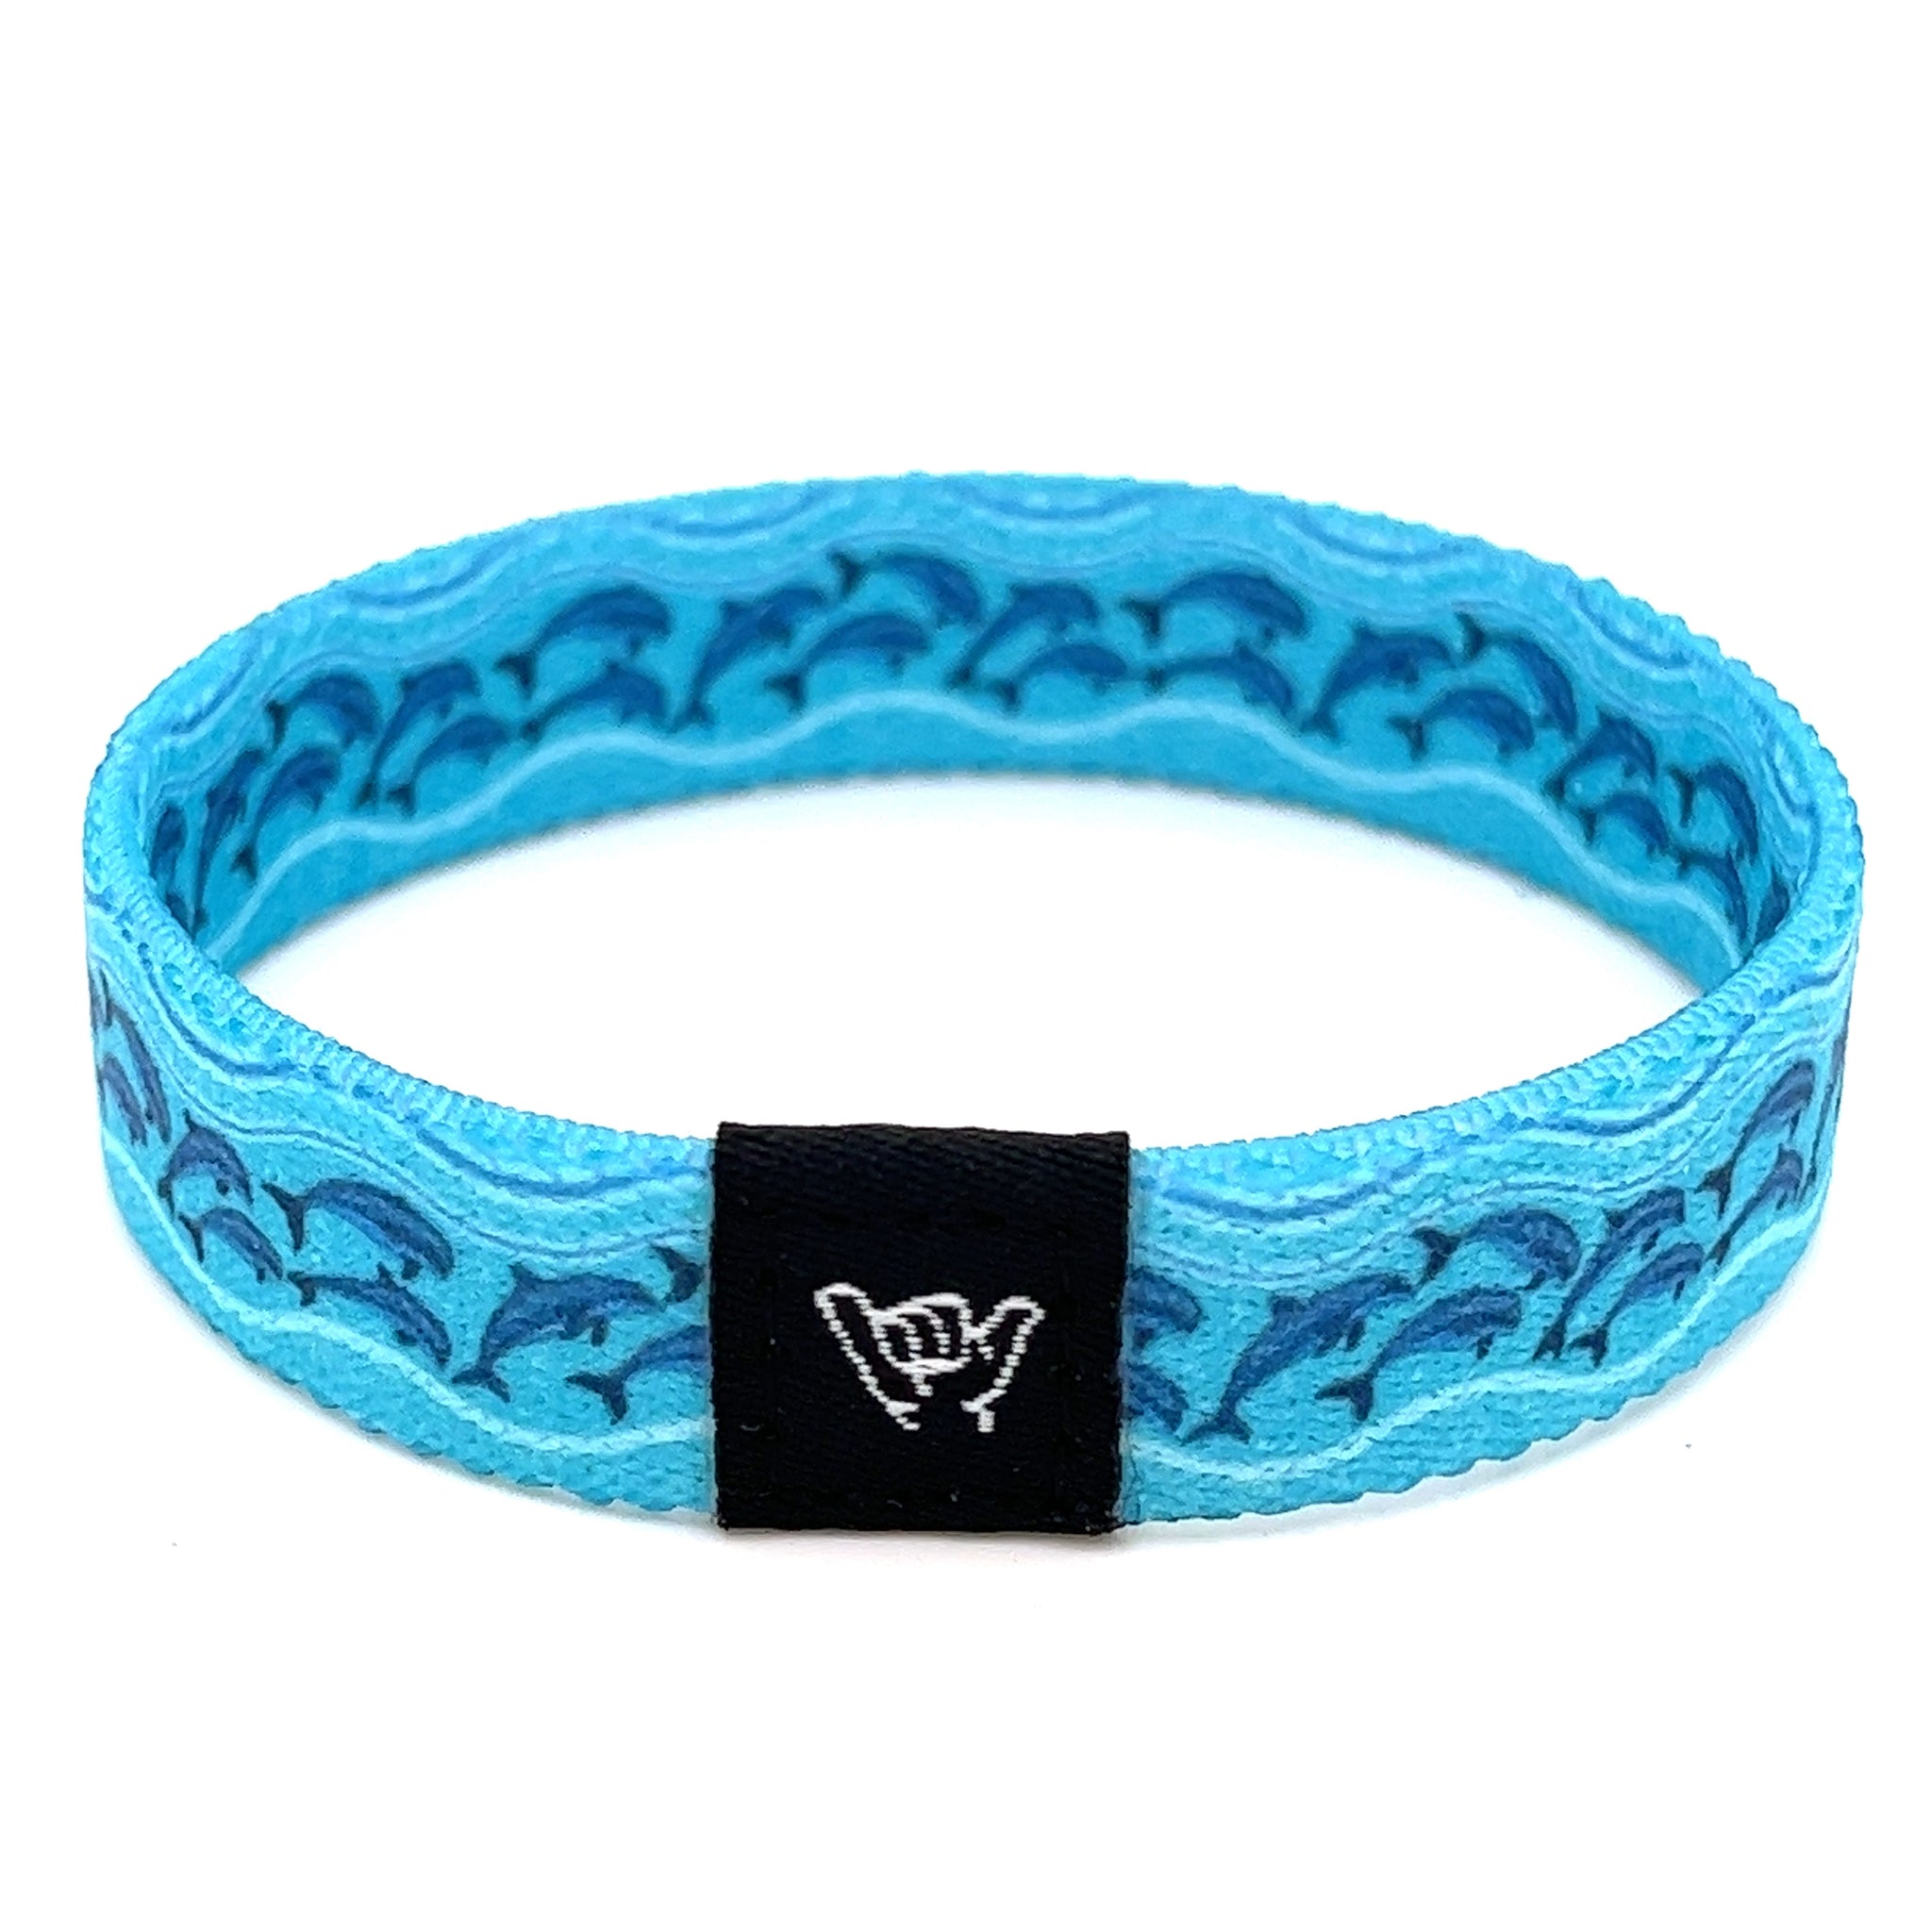 of – Bands Wristband School Loose Dolphins Bracelet Hang